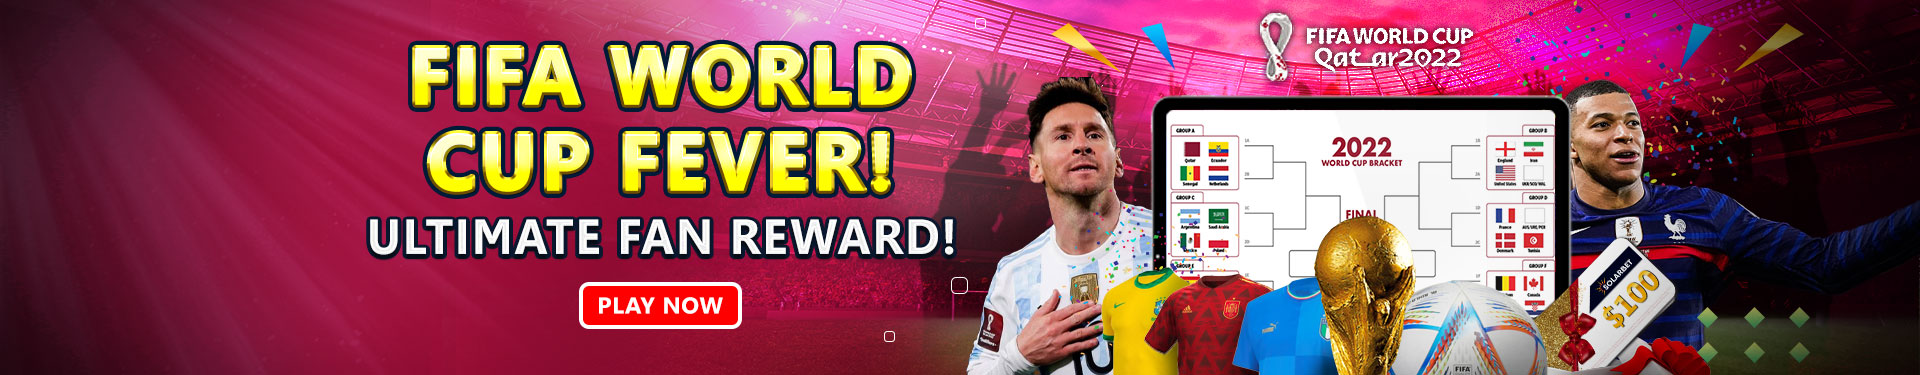 Fifa World Cup Fever Banner